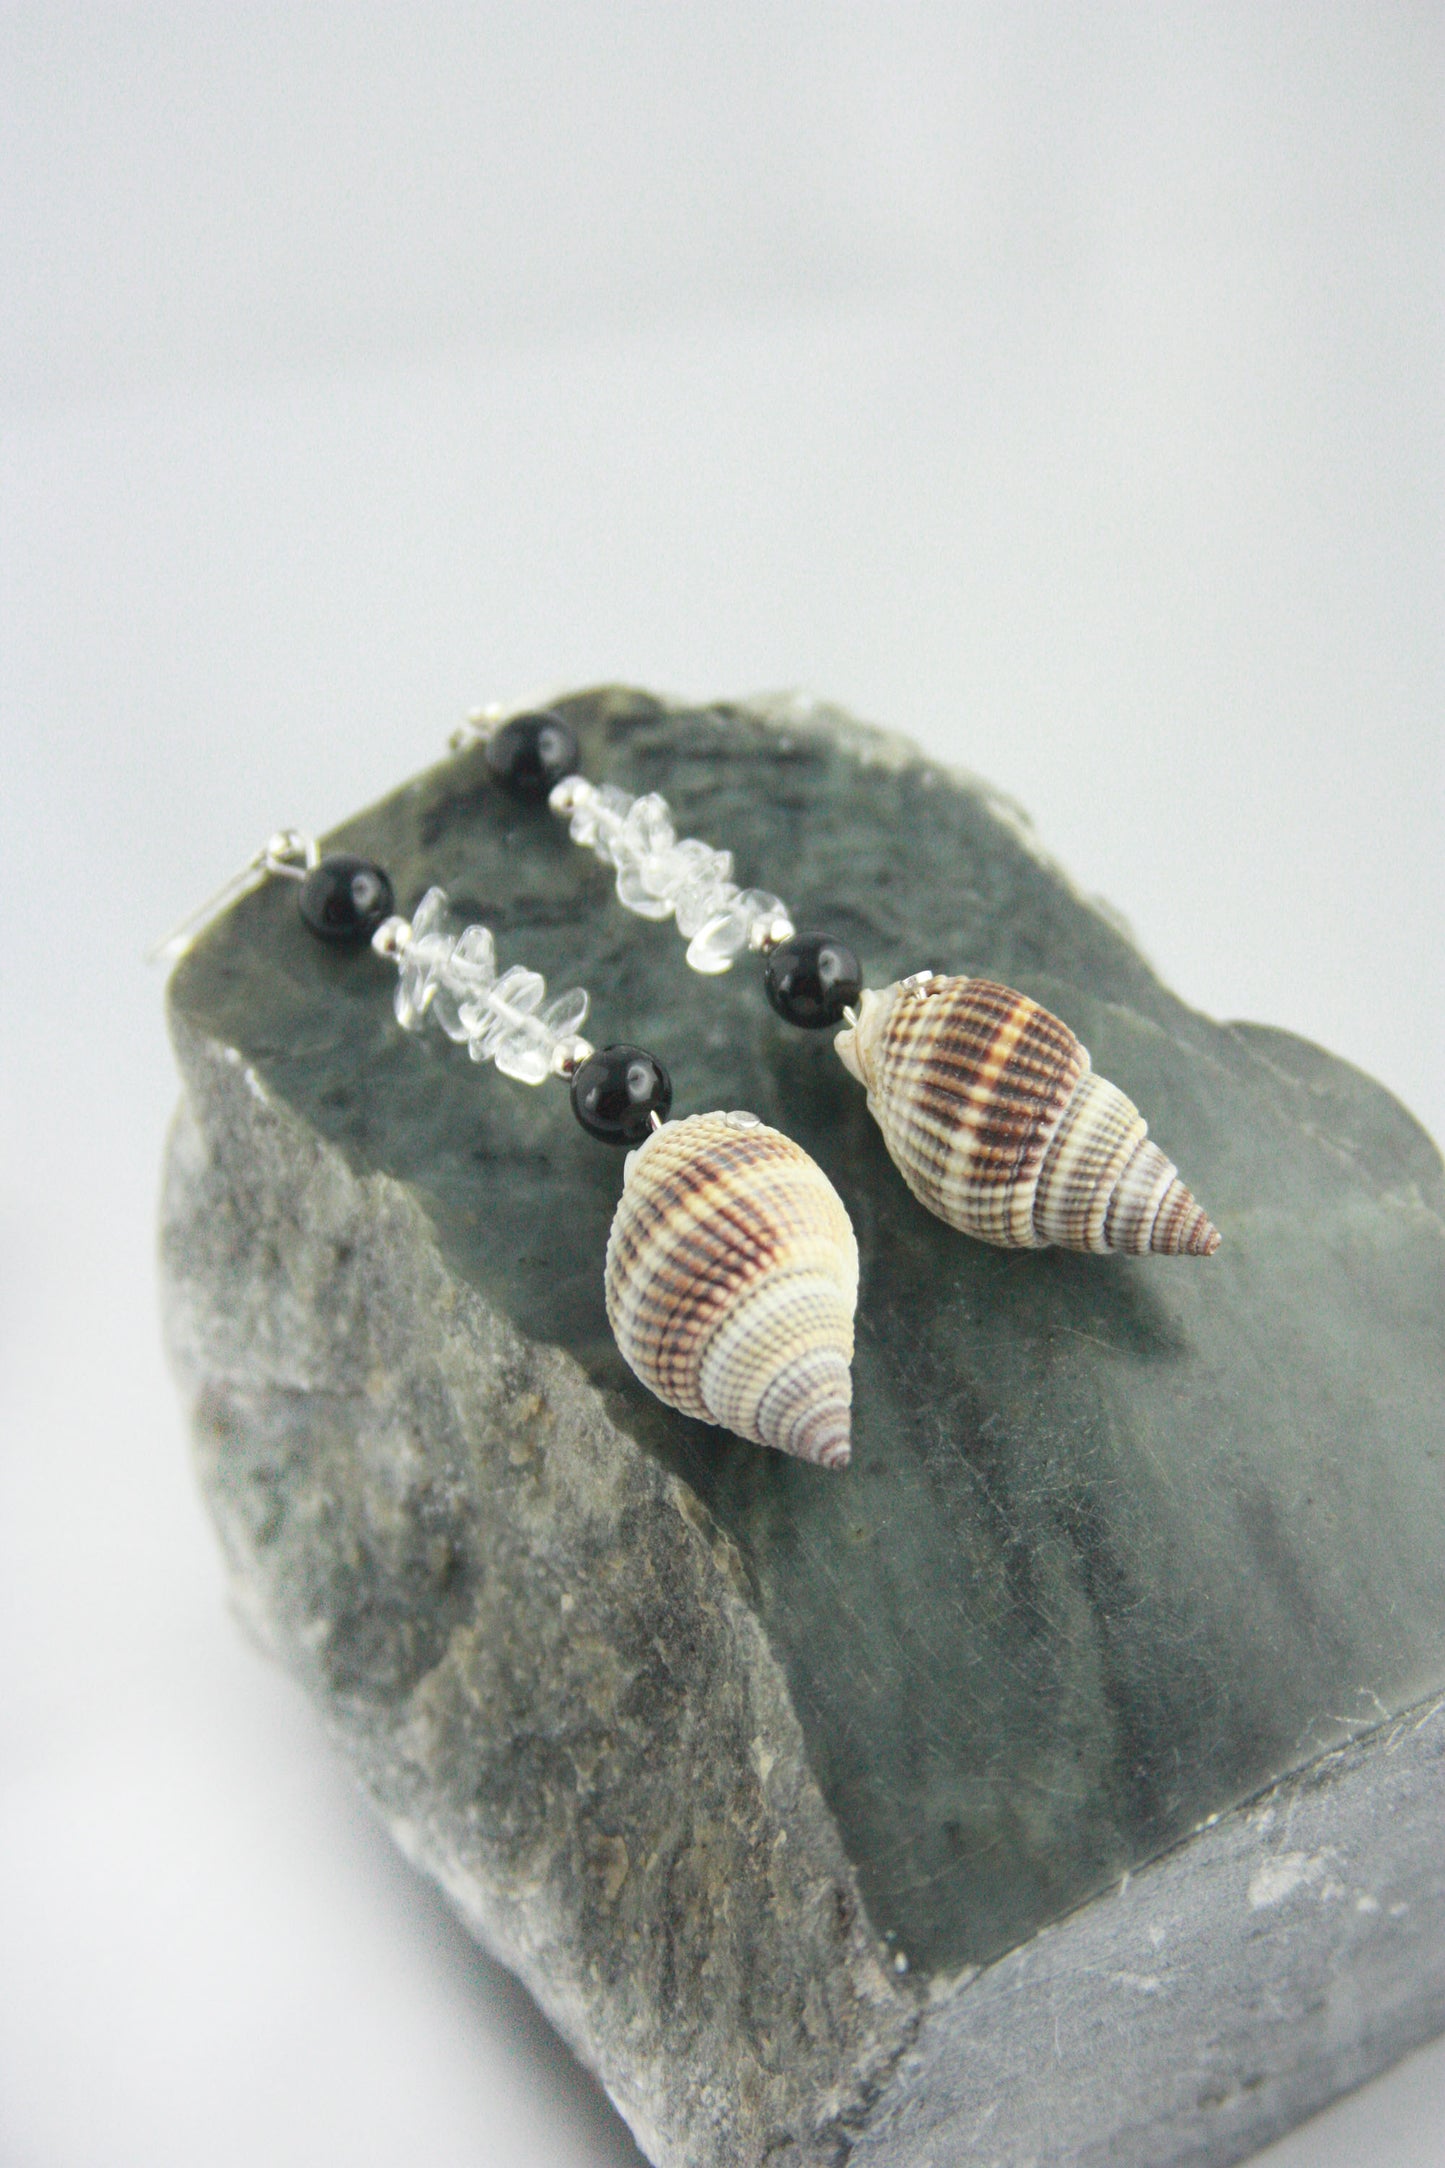 Unique Seashell Pendant Earrings STELLA with Quartz crystal and Onyx, 925 silver